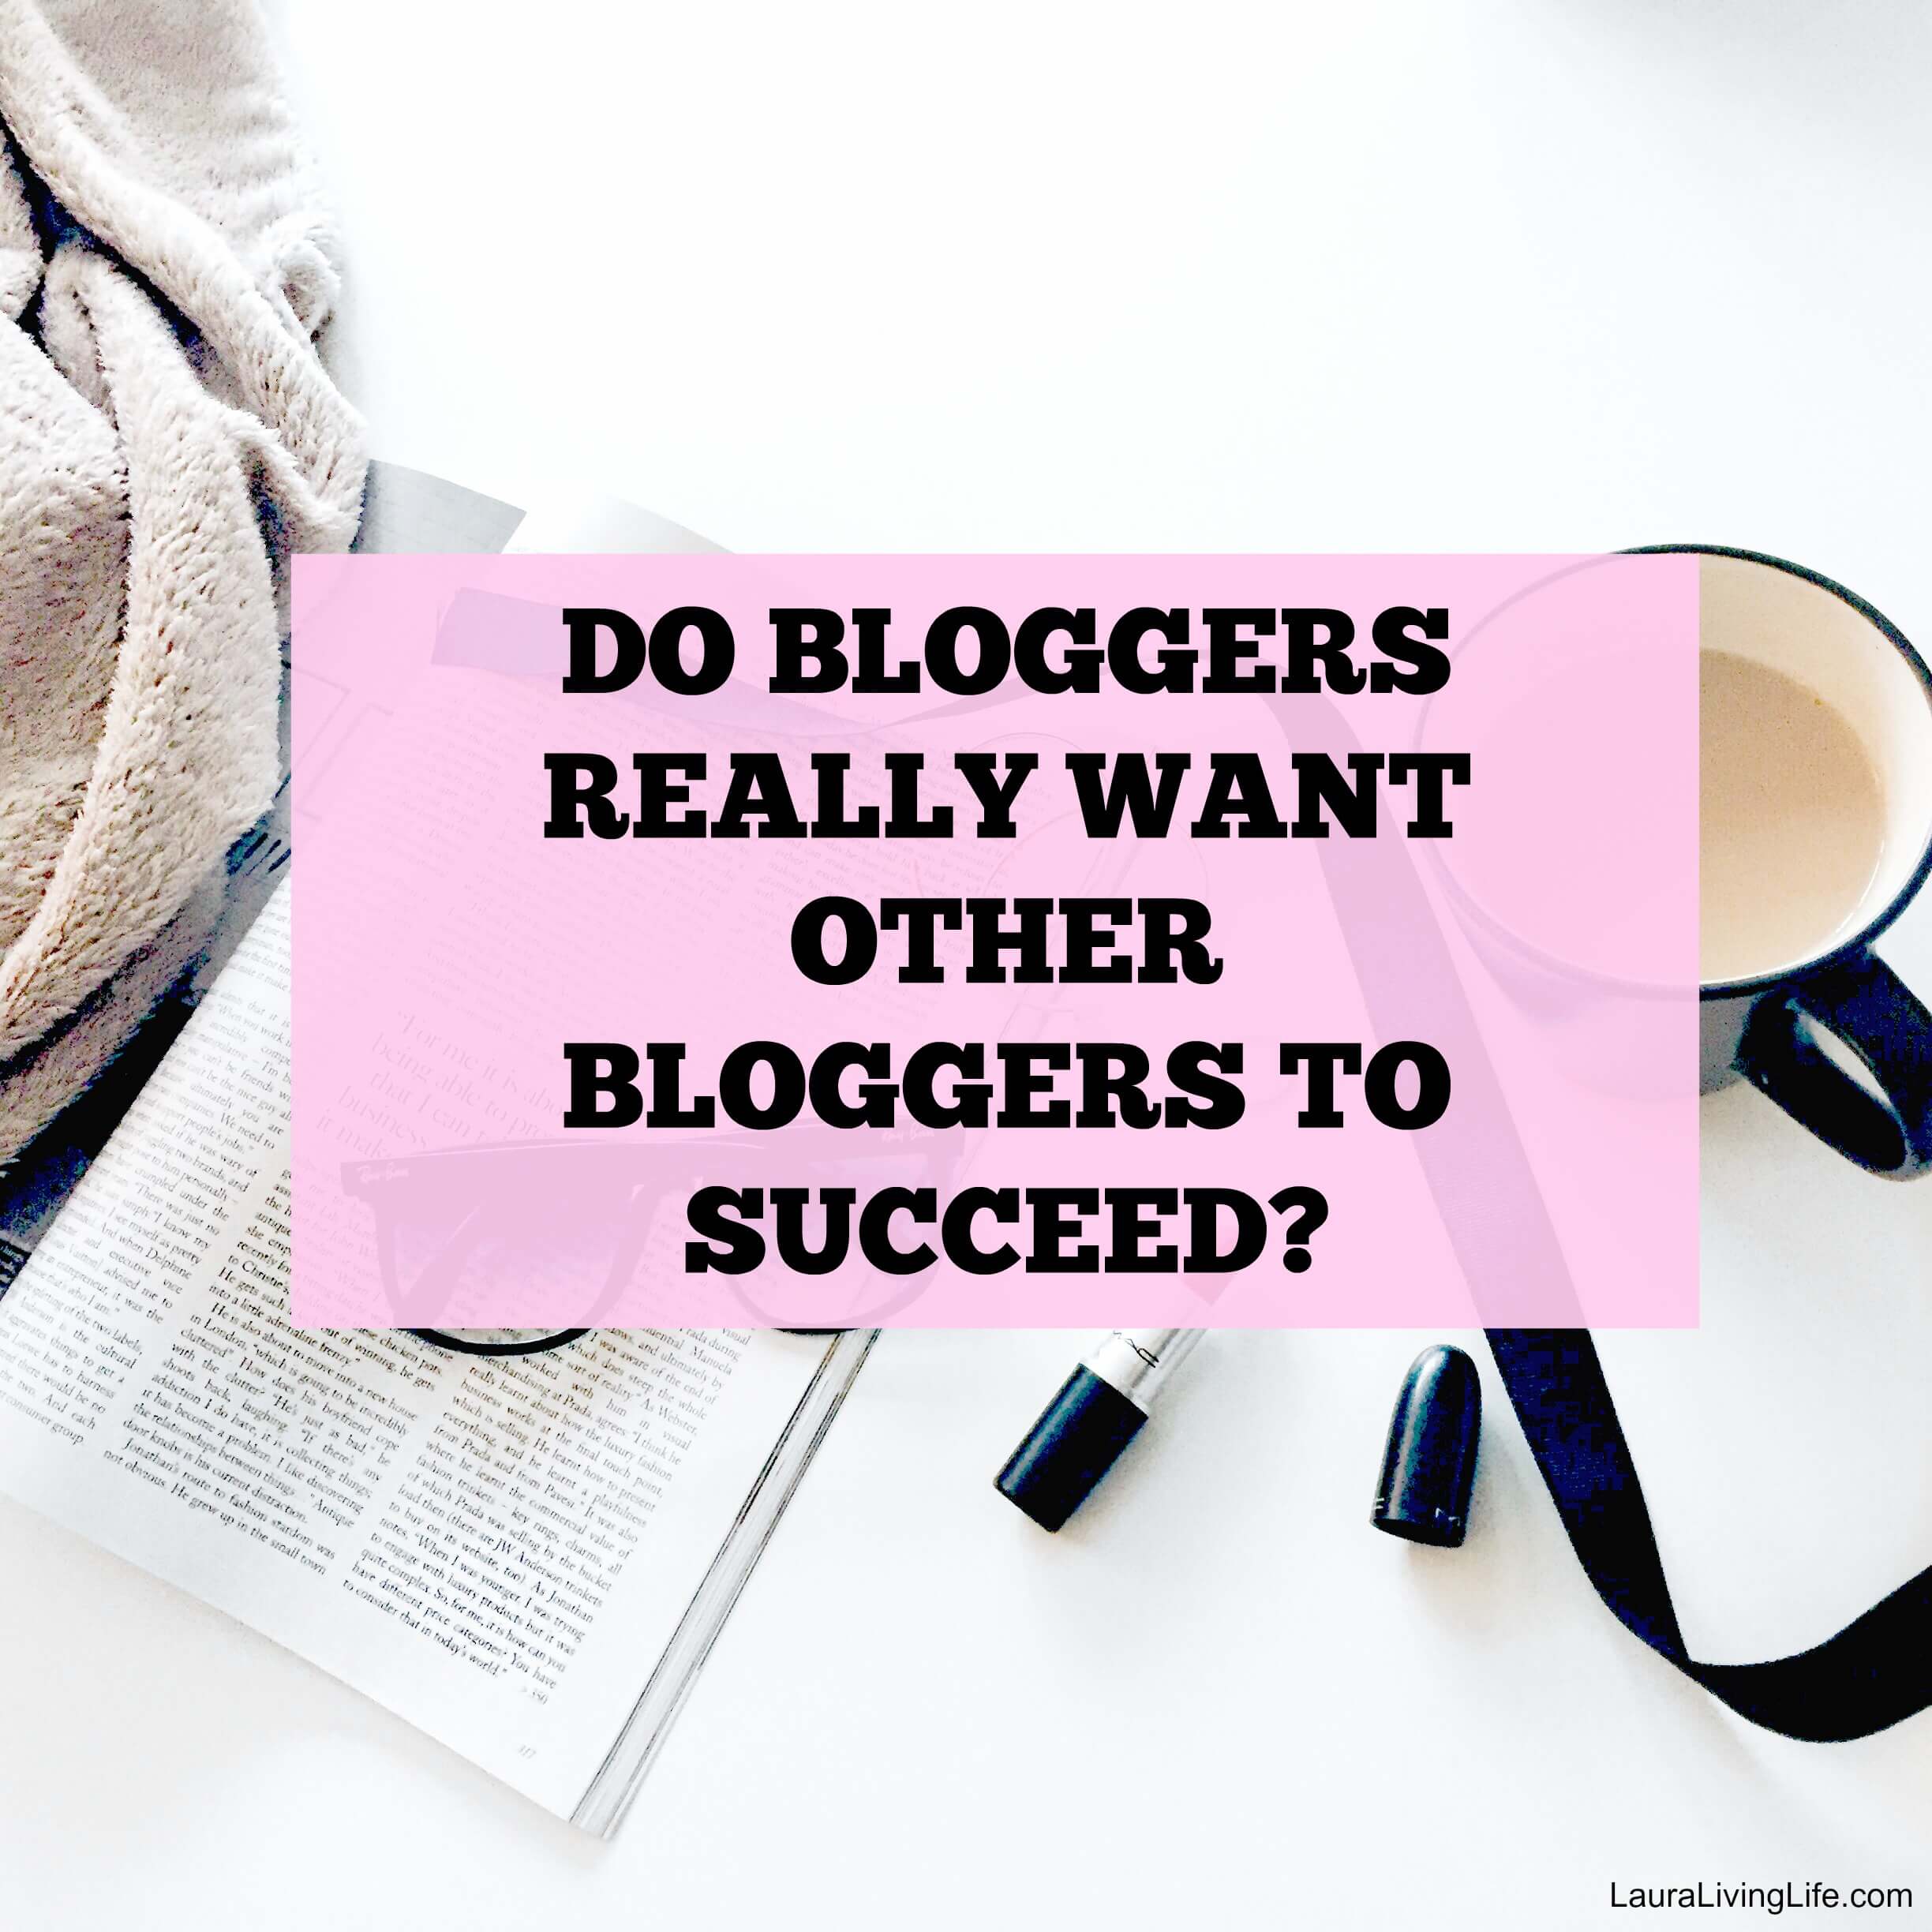 do bloggers really want other bloggers to succeed?